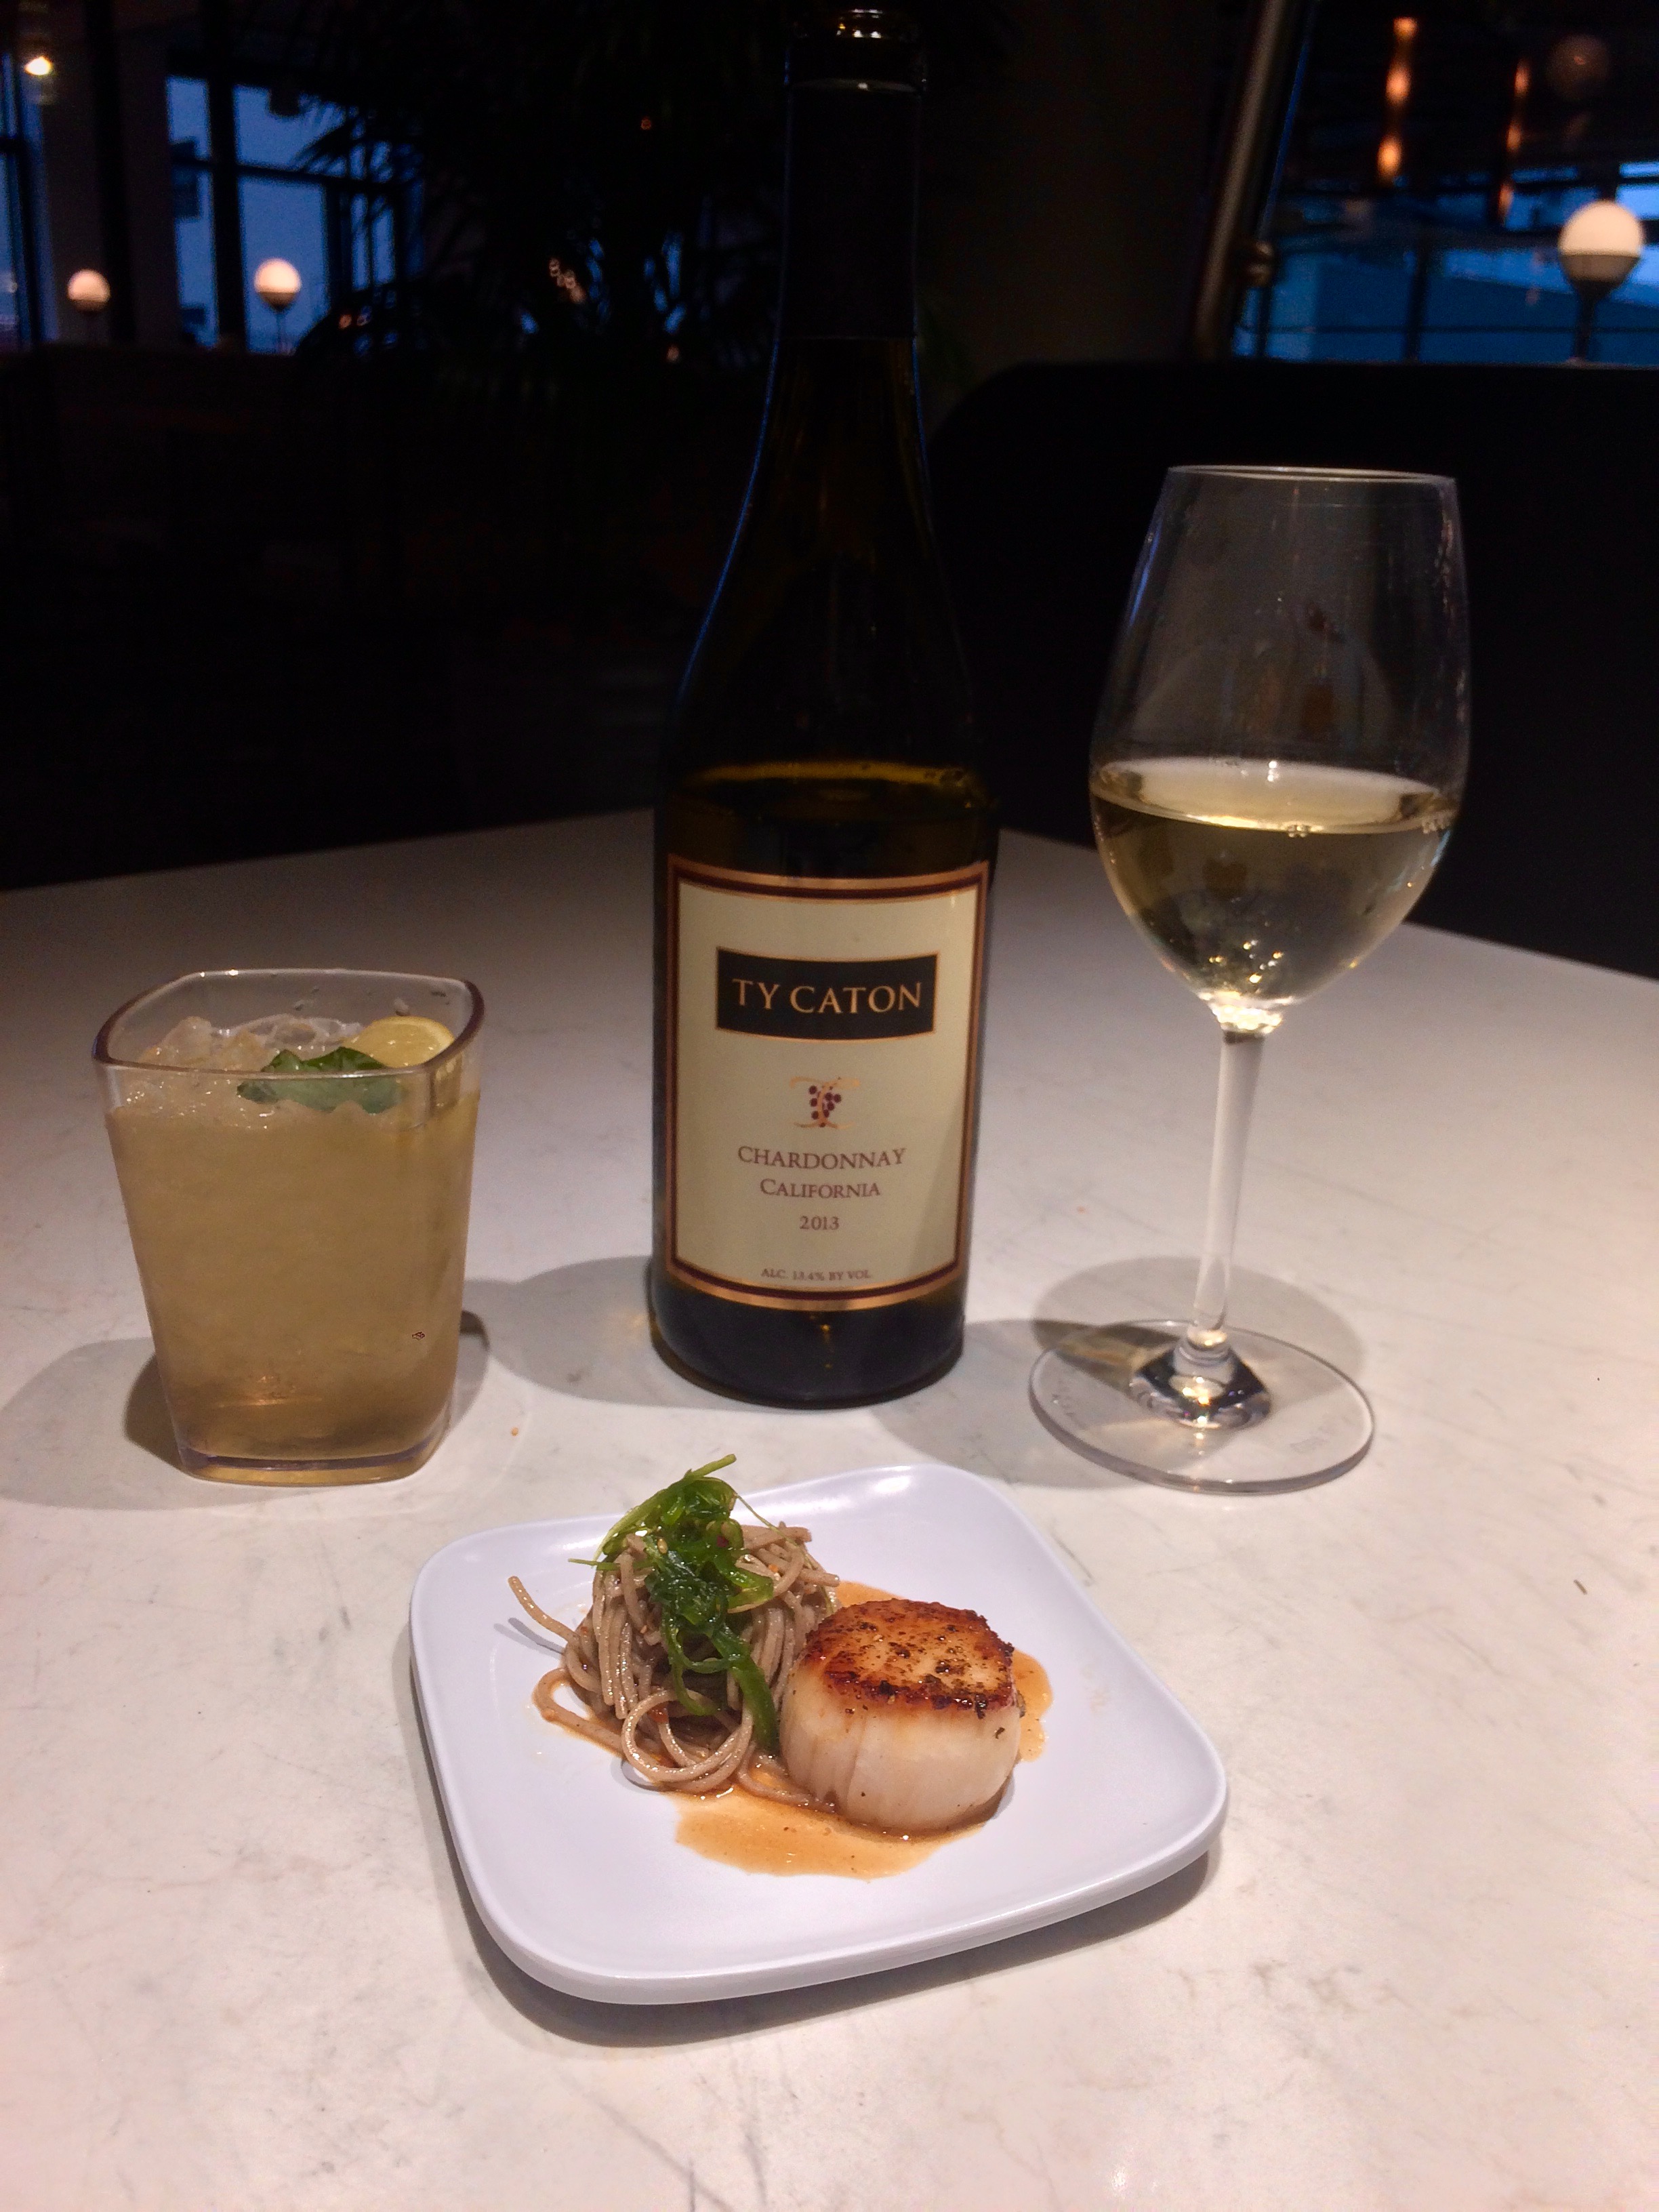 Wine pairing with cocktail, scallop, and pasta